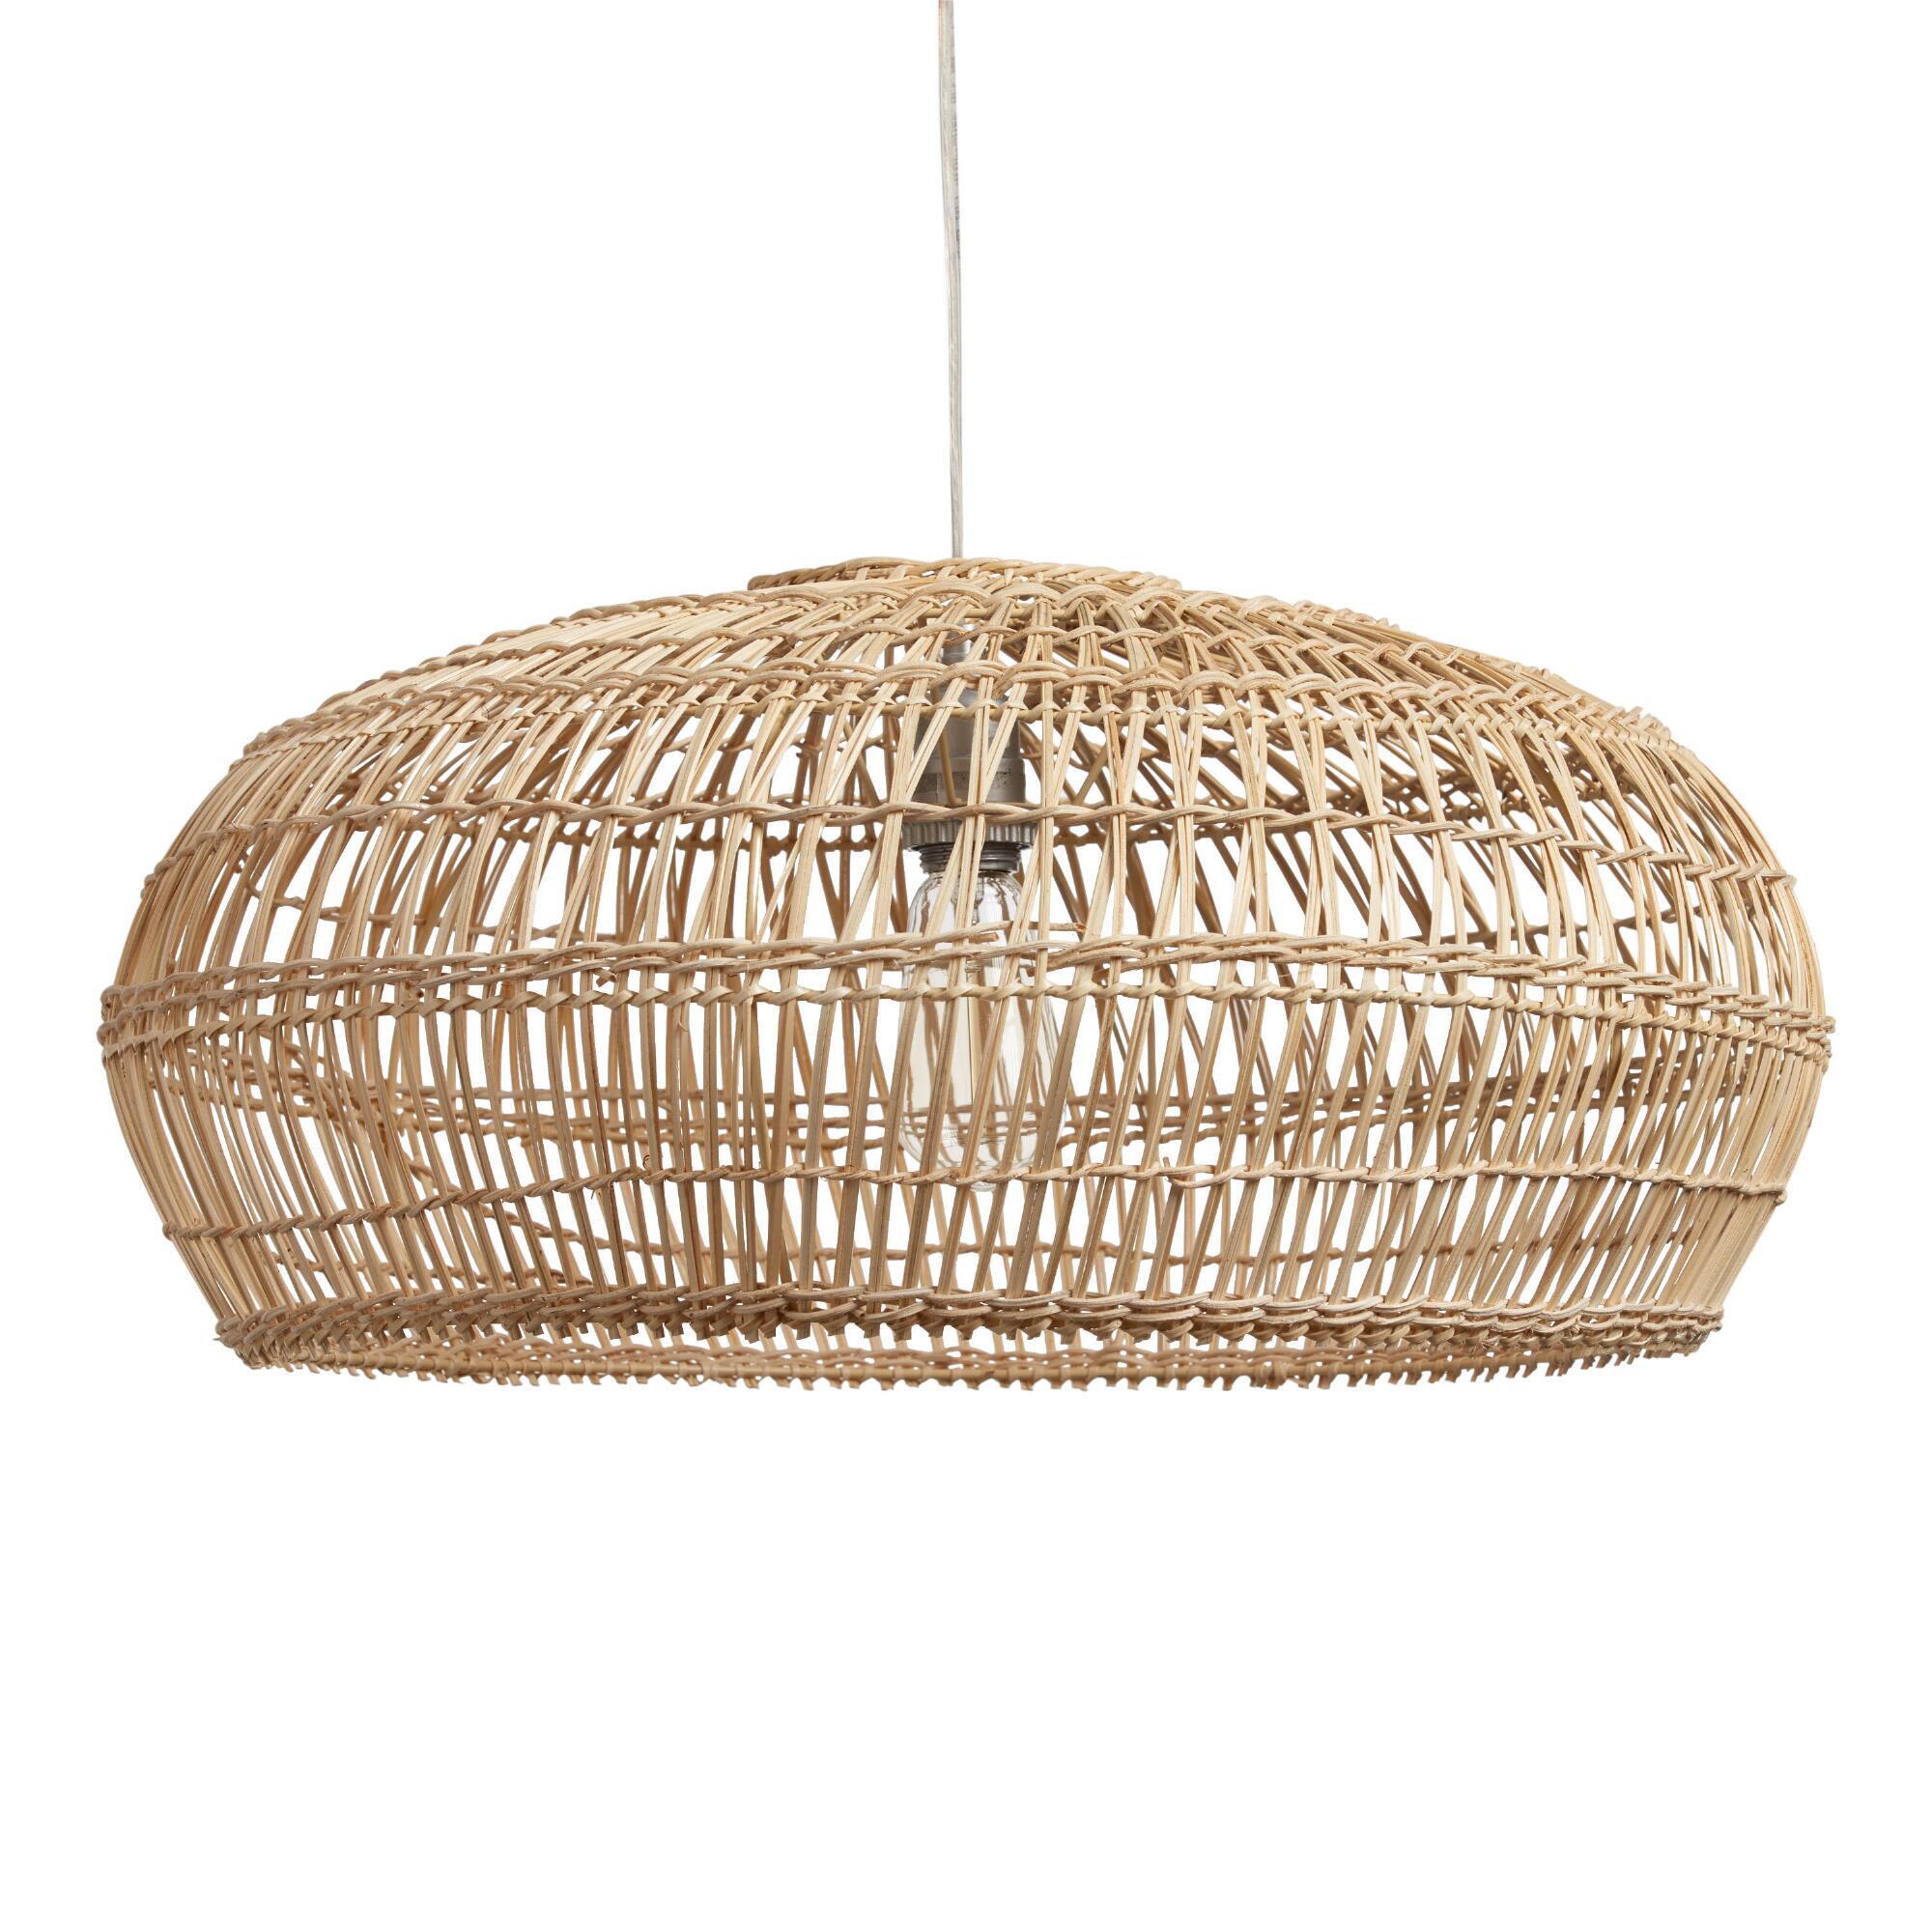 Bamboo Open Weave Orb Pendant Shade: Natural - Natural Fiber by World Market